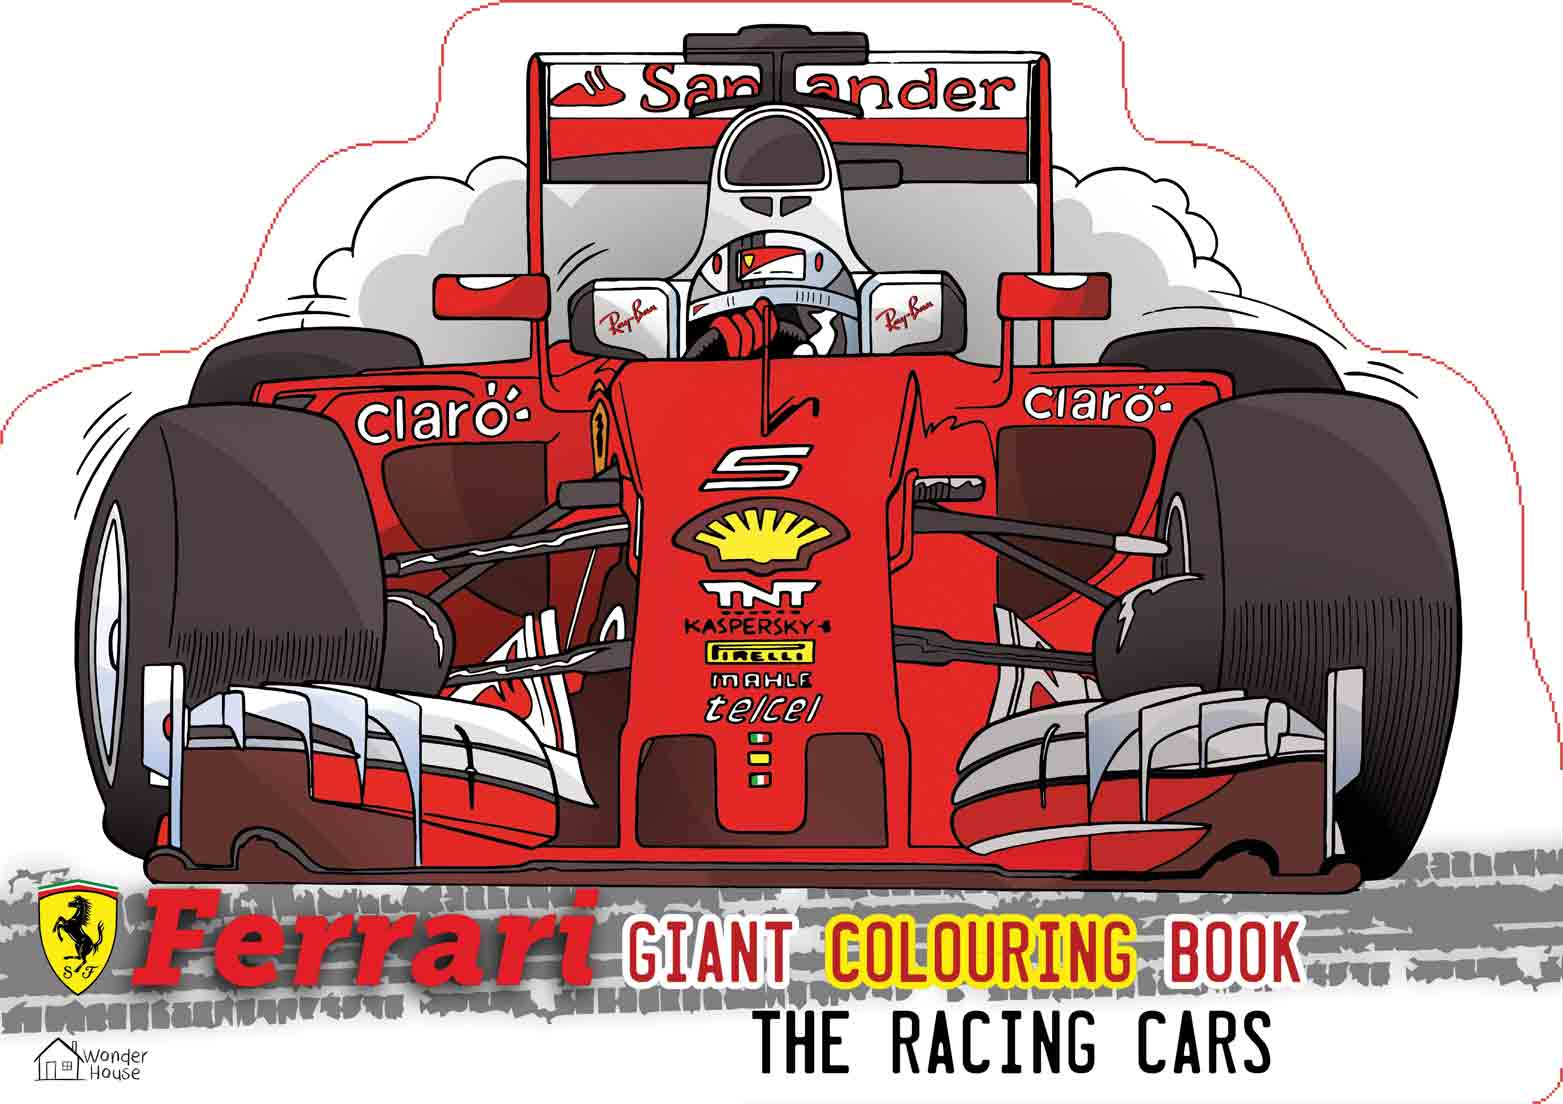 Ferrari Giant Colouring Book For Kids: The Racing Cars